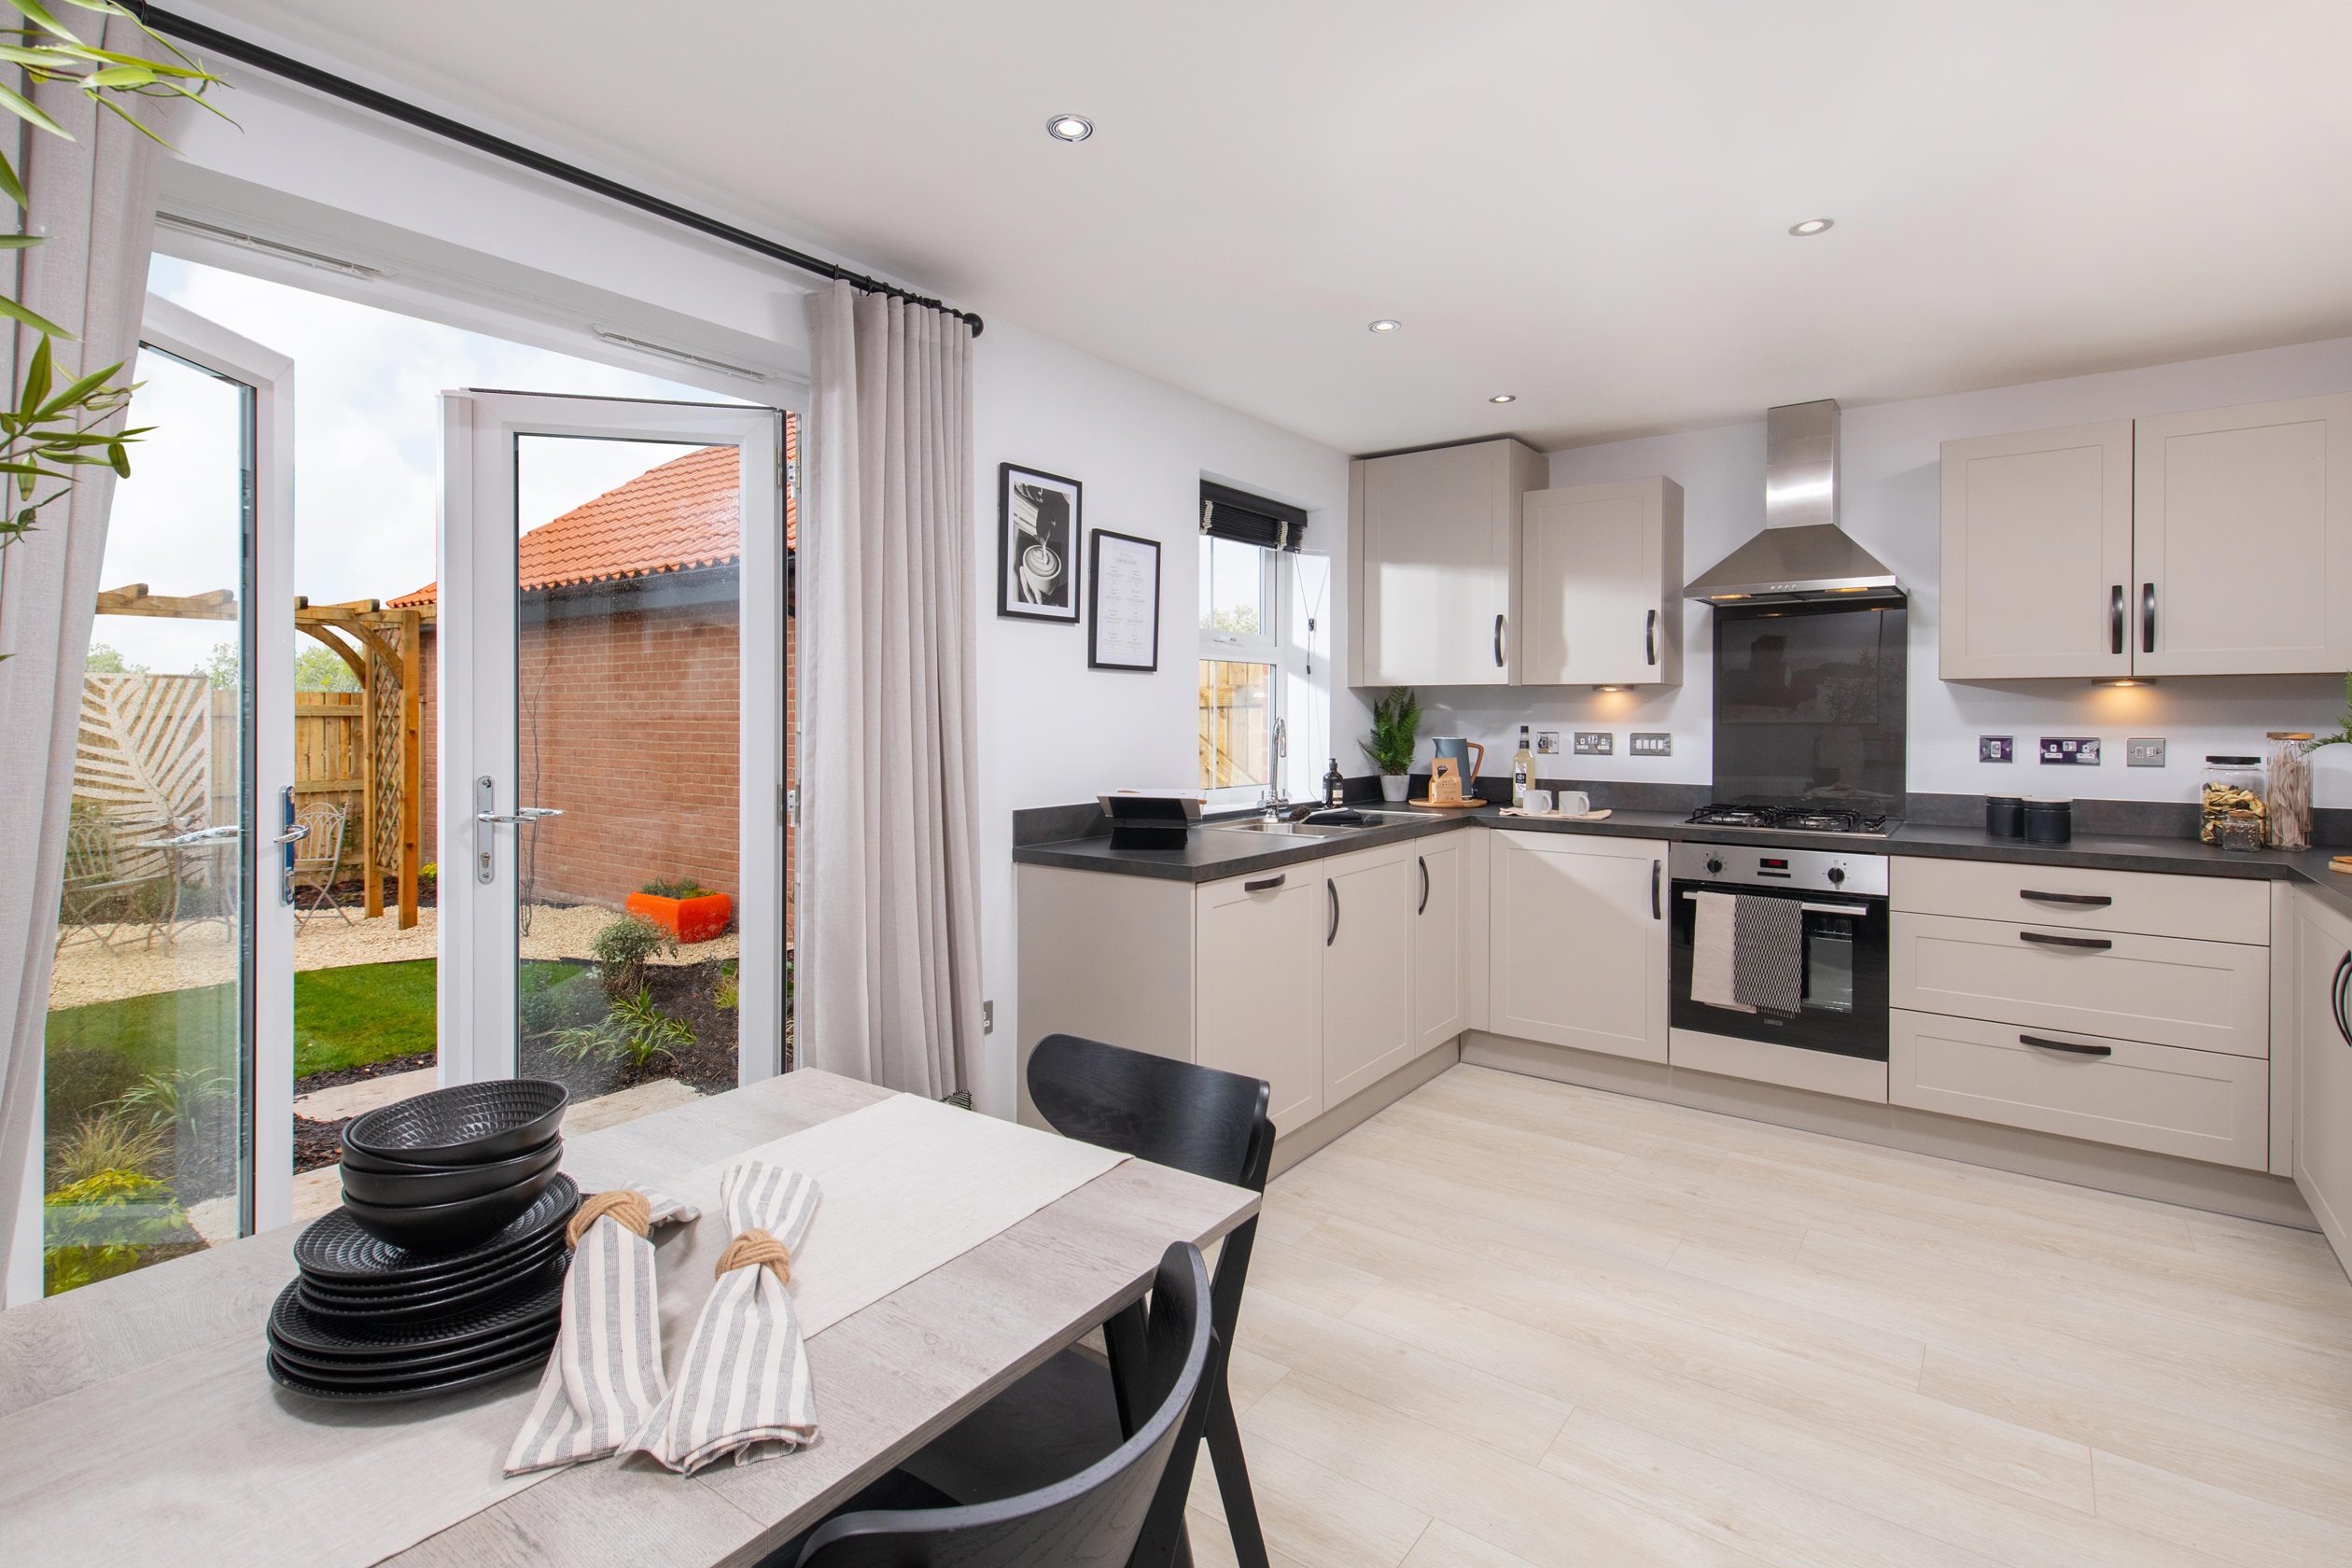 Property 2 of 10. The Archford Show Home